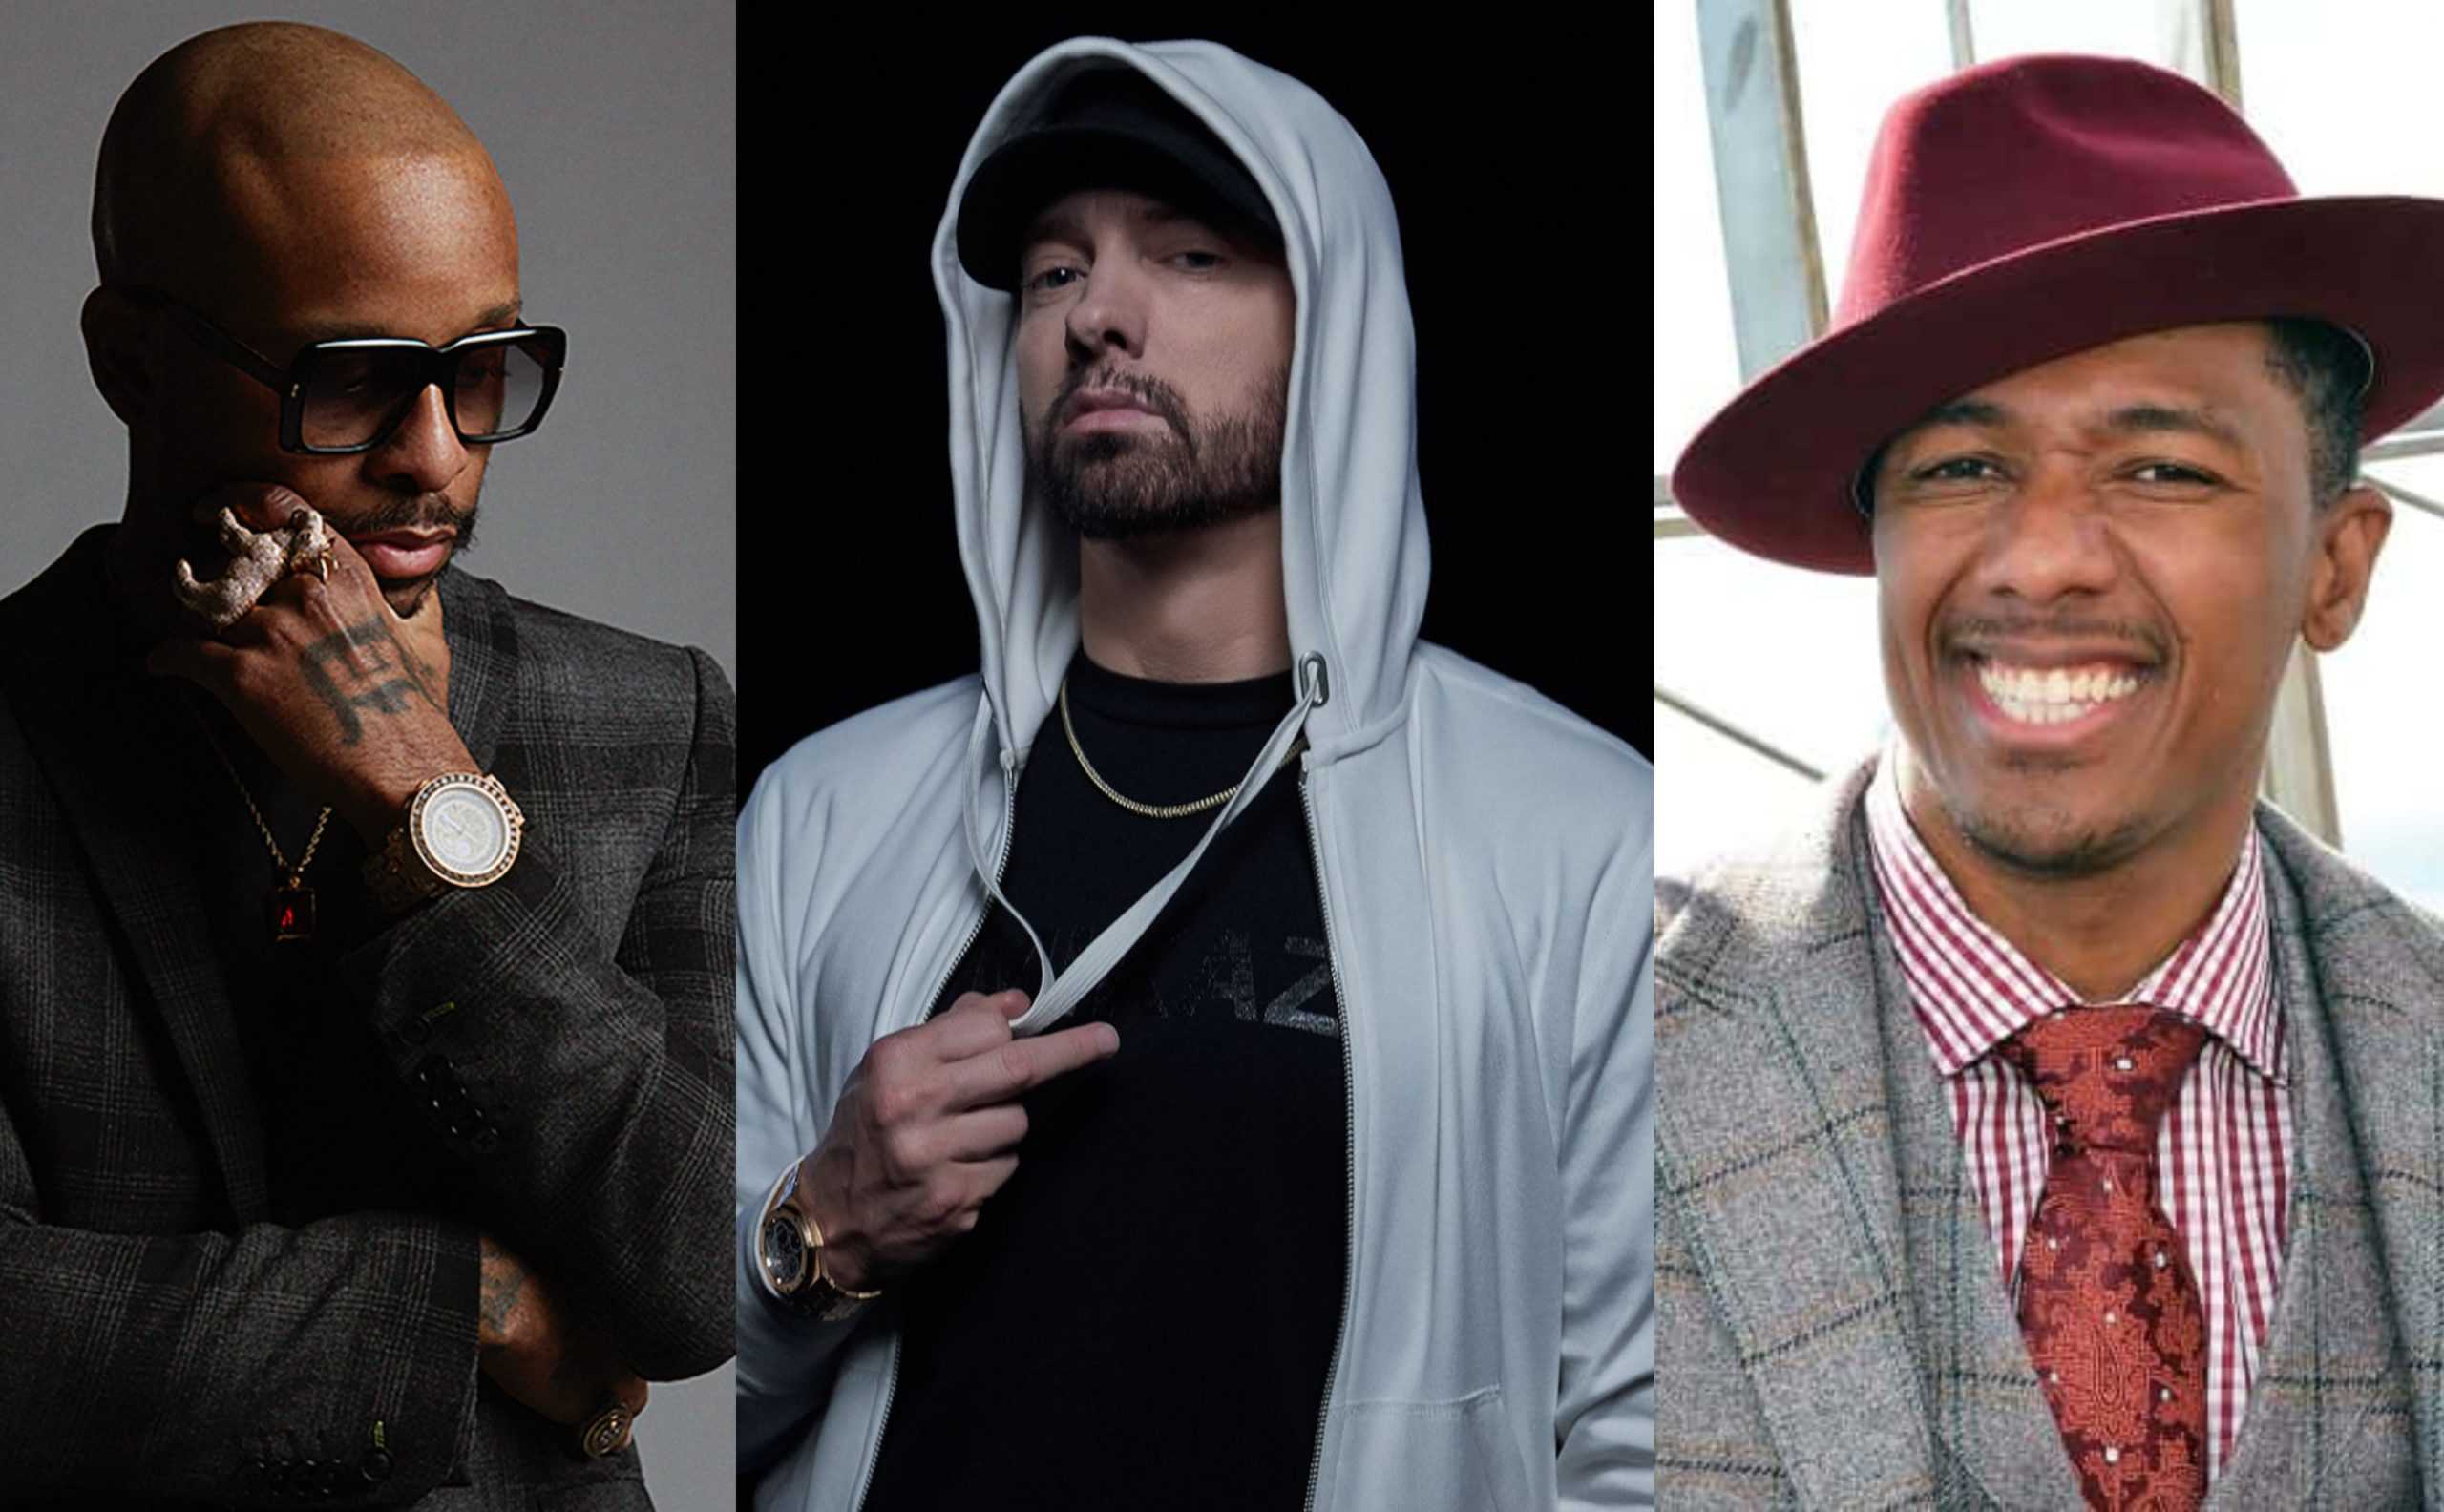 Nick Cannon & Royce 5'9 Talks About Eminem, DJ Vlad, Beef With D12